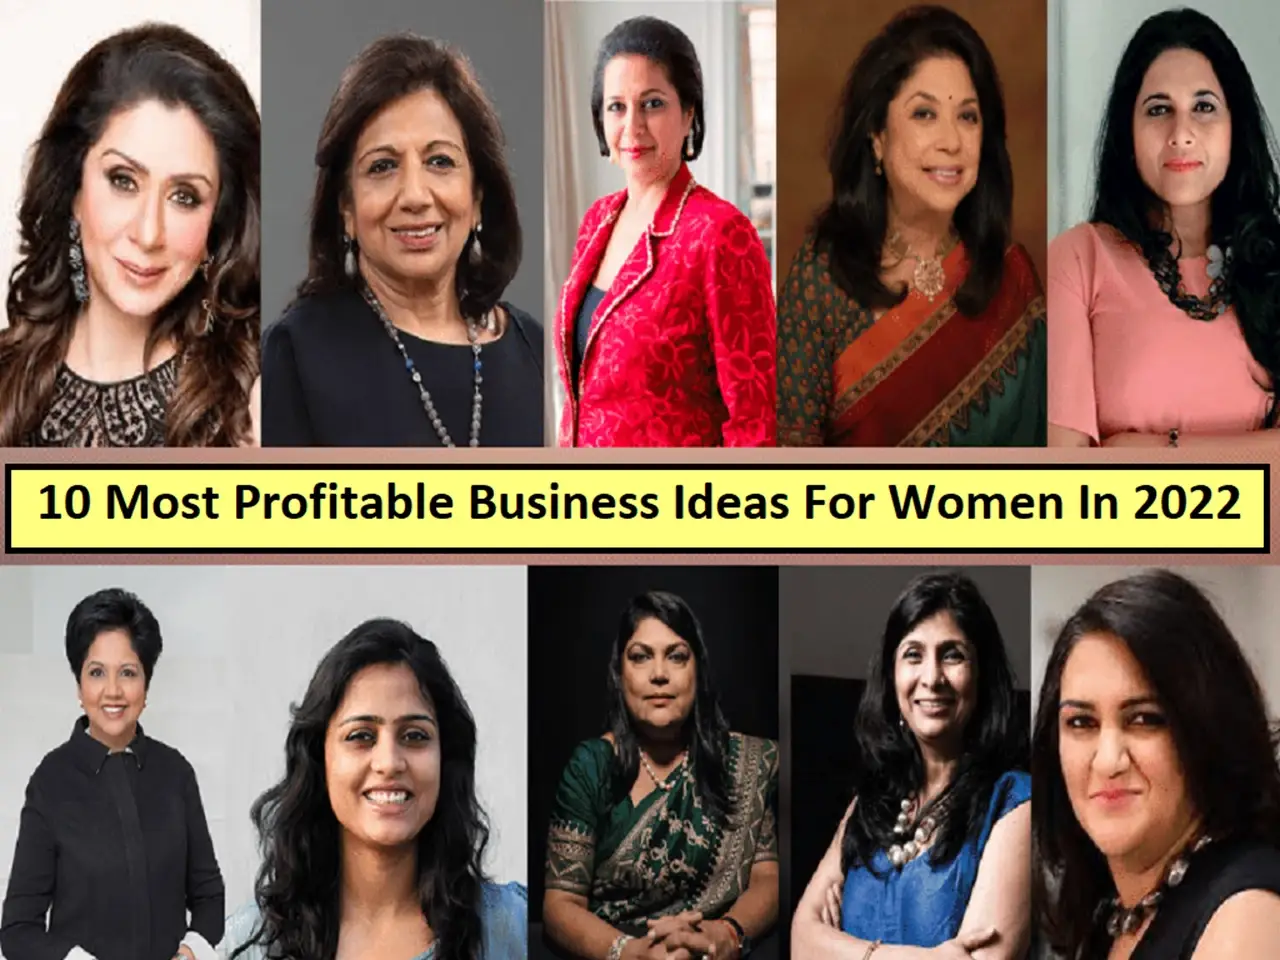 Top 10 Profitable Business Ideas for Women in 2022